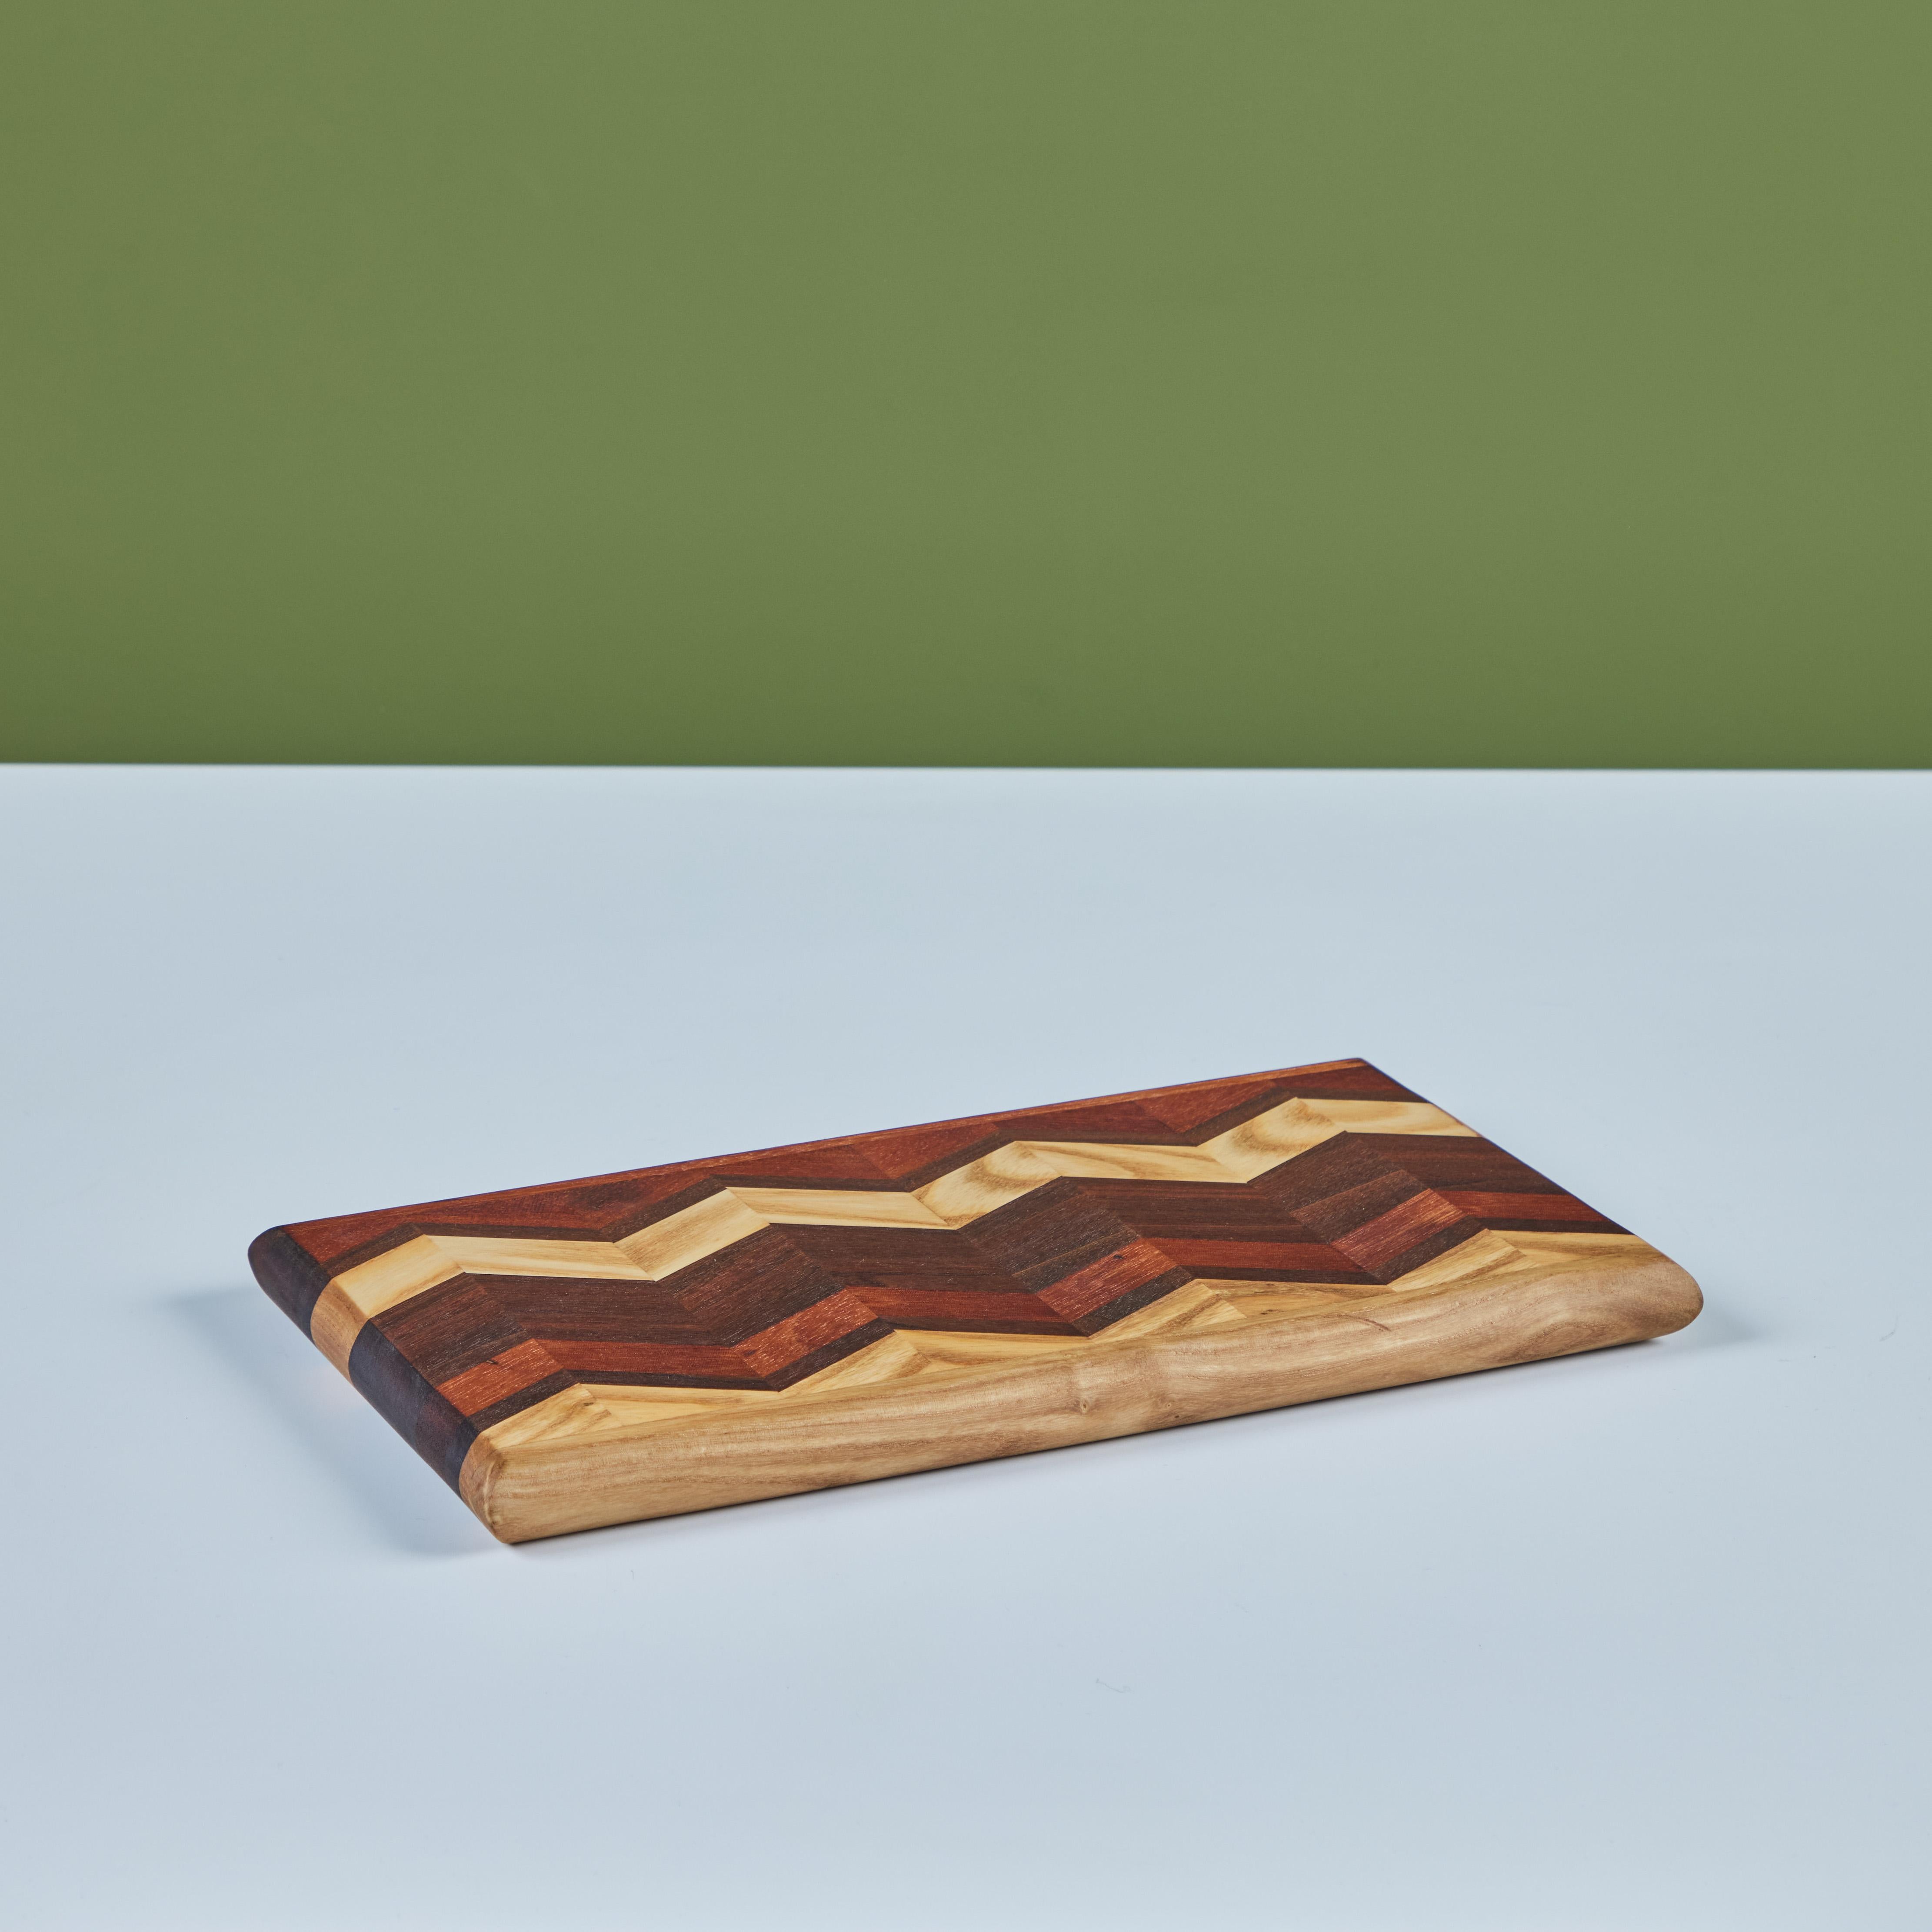 Mexican Don Shoemaker Wood Inlaid Chevron Pattern Cutting Board for Señal For Sale